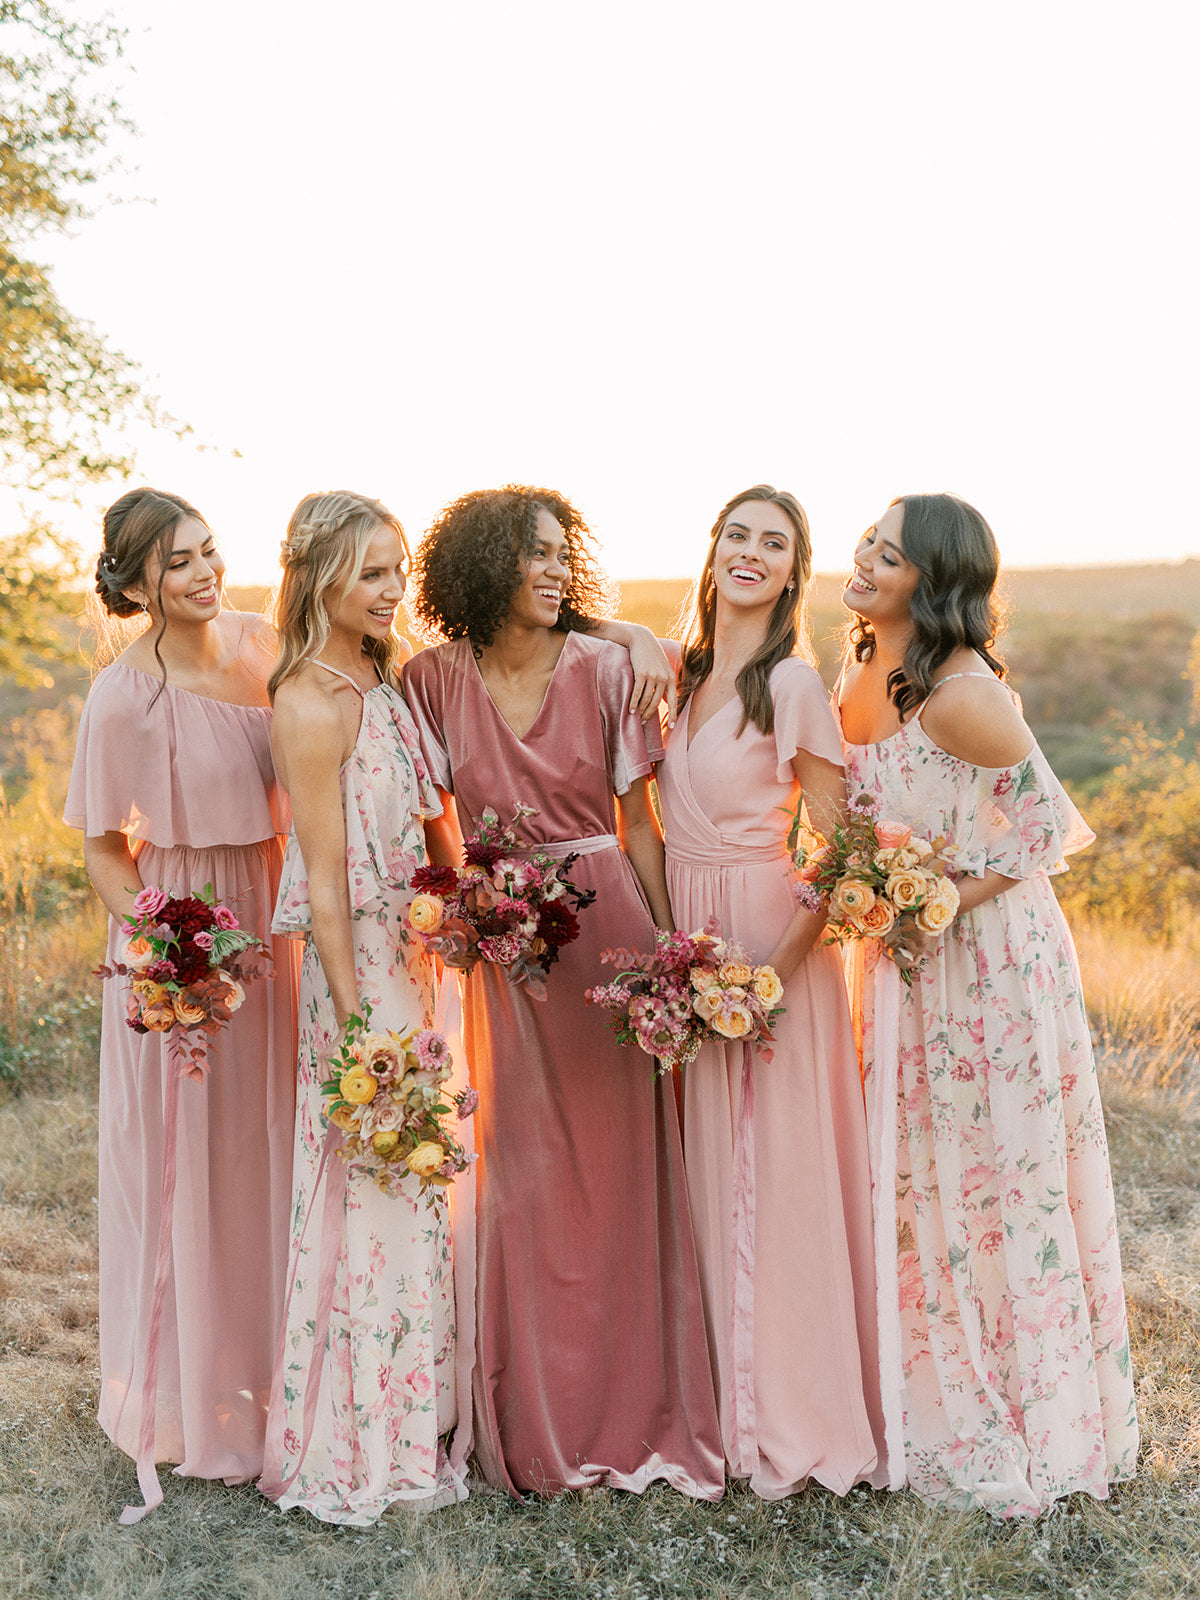 Pink Wedding Dresses: 37 Picks from Blush to Bold - hitched.co.uk